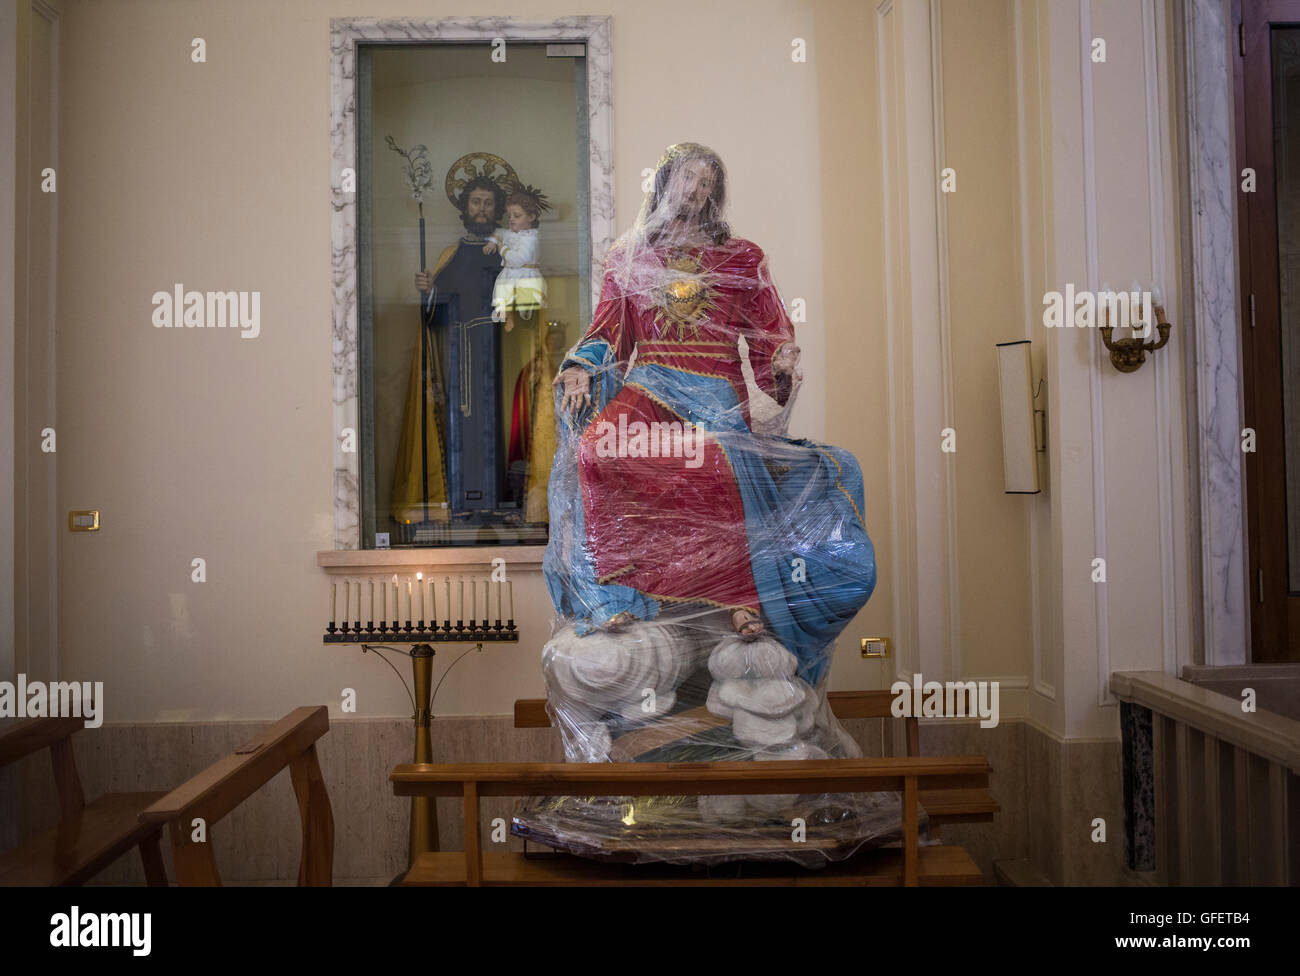 A stature of Jesus is wrapped in cling film at Mother Church of 'St. George the Martyr' in Locorotondo, Puglia, Italy Stock Photo